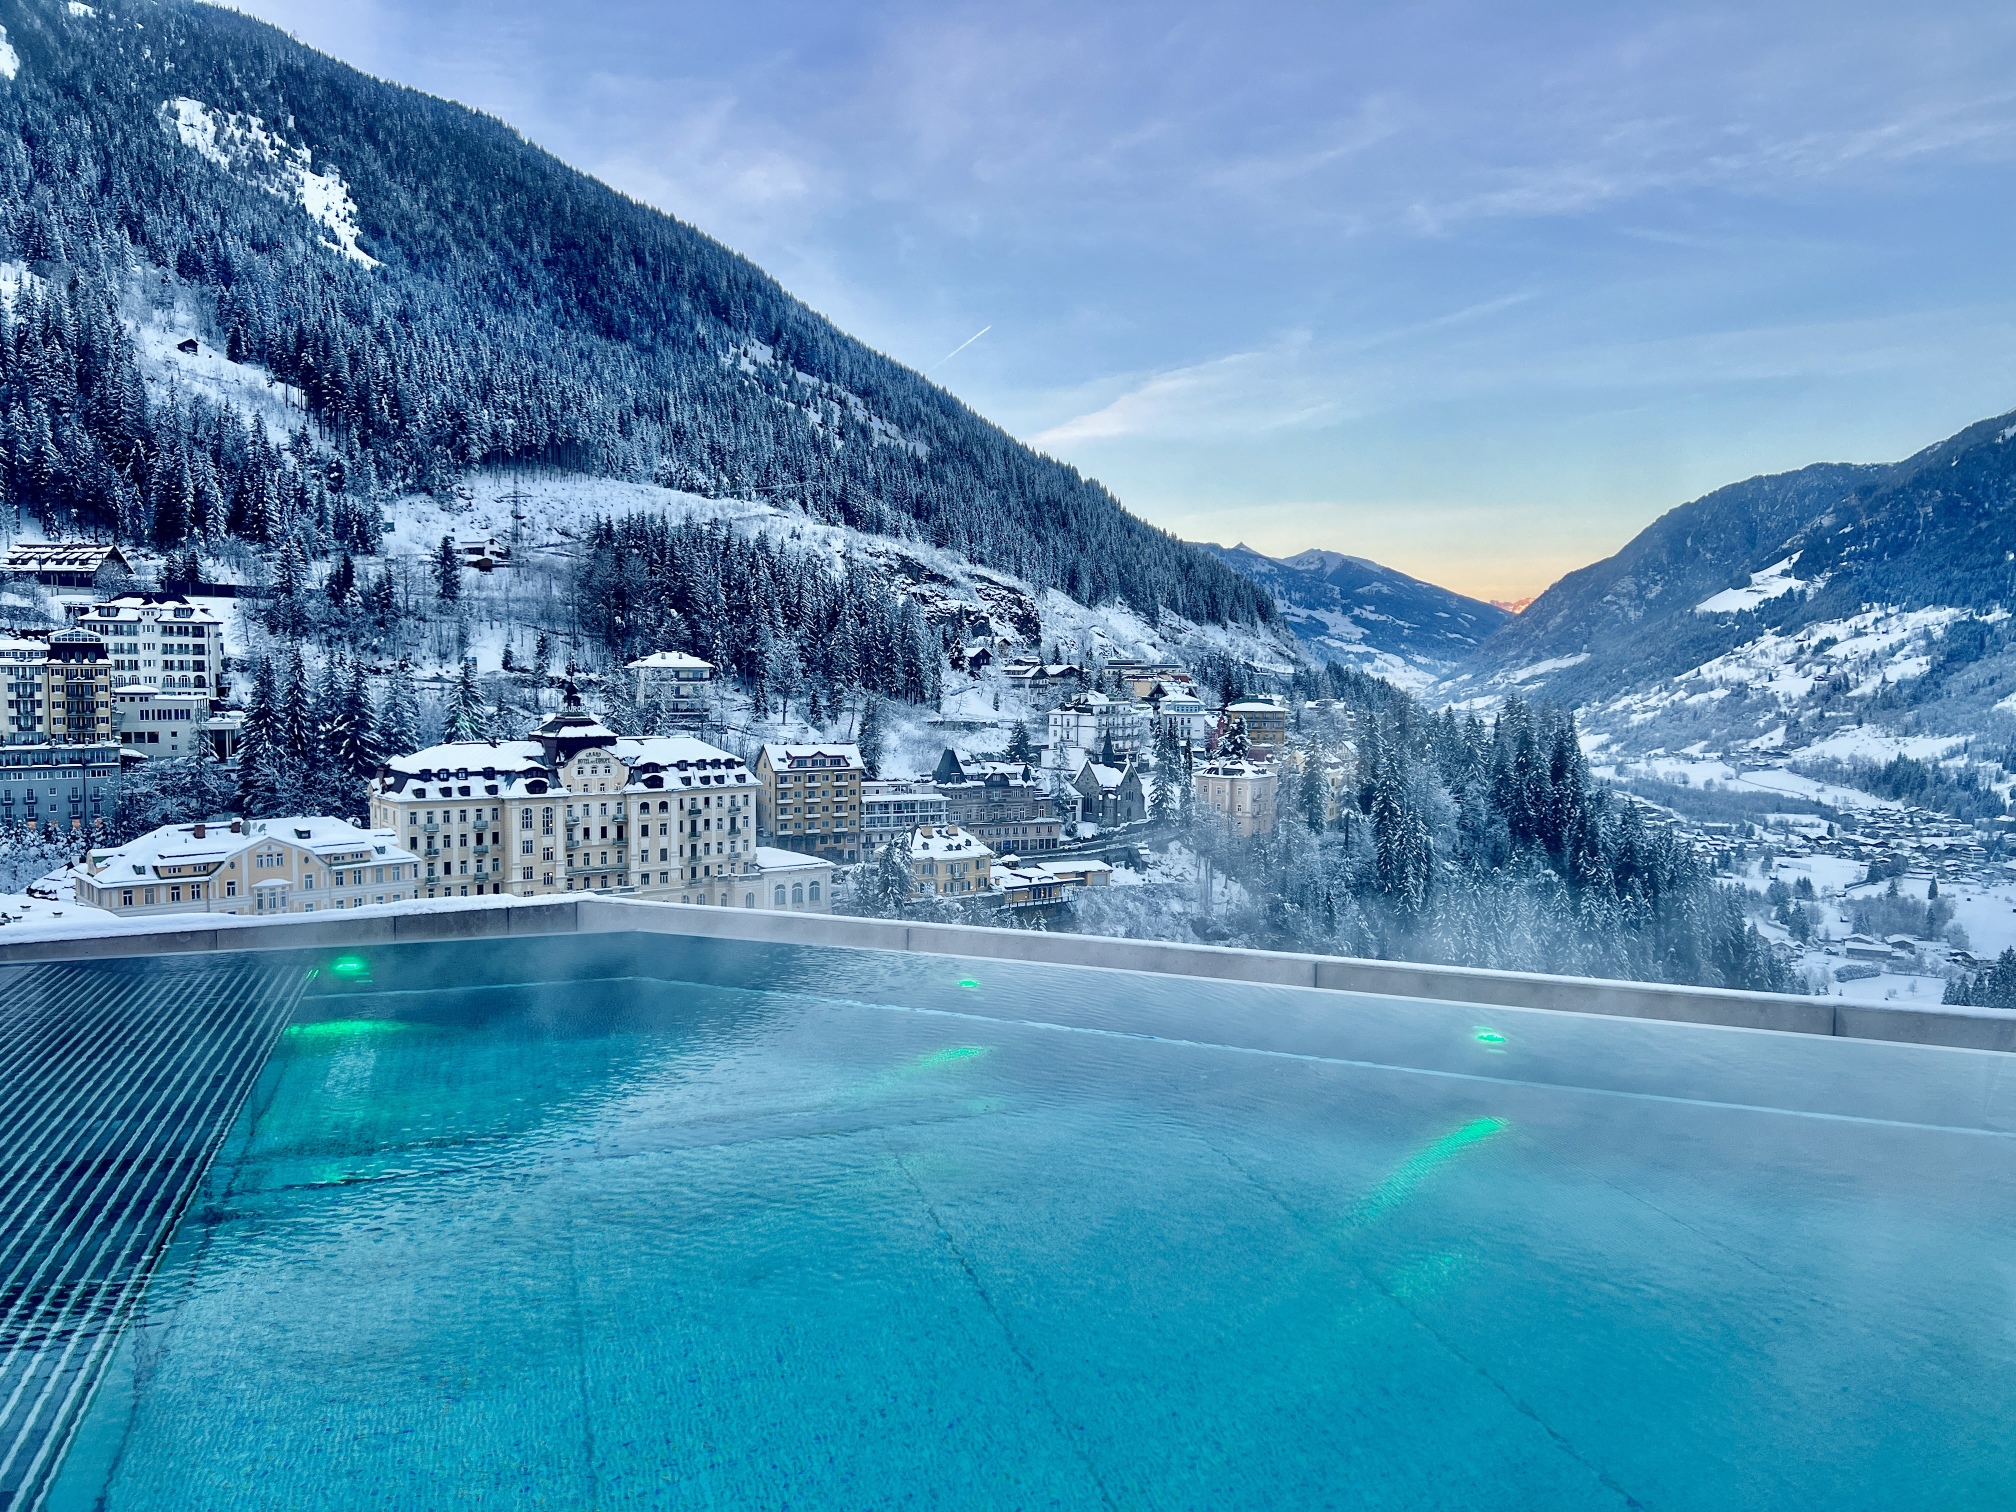 A swimming pool in the middle of a snow covered mountain.